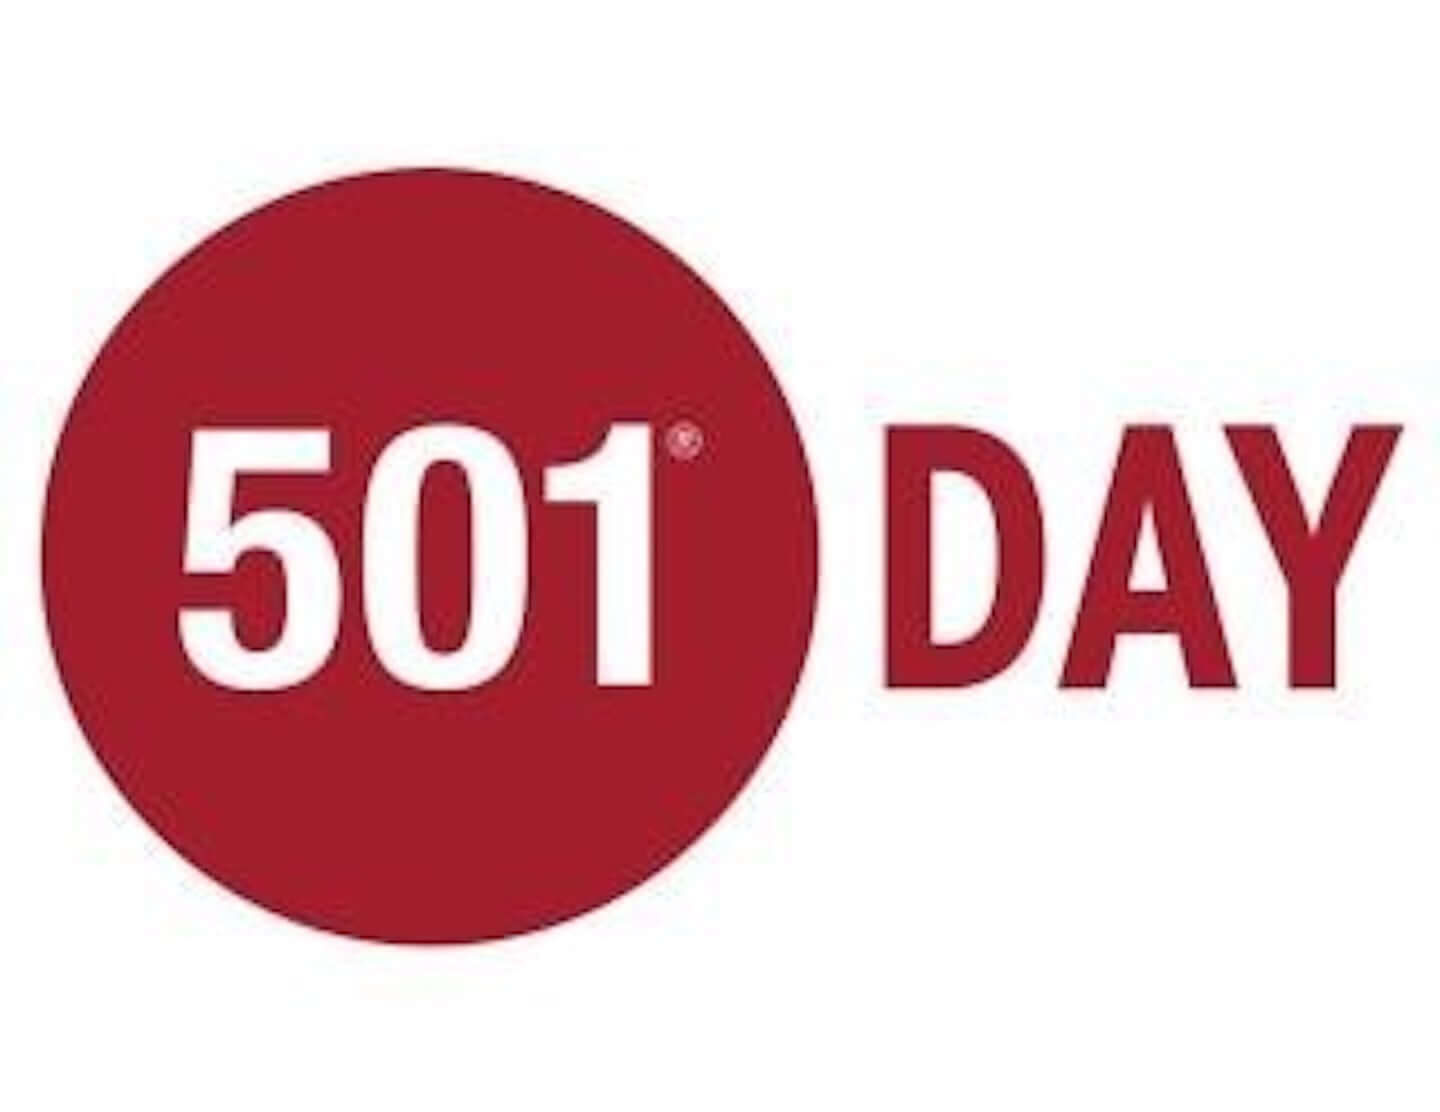 501day